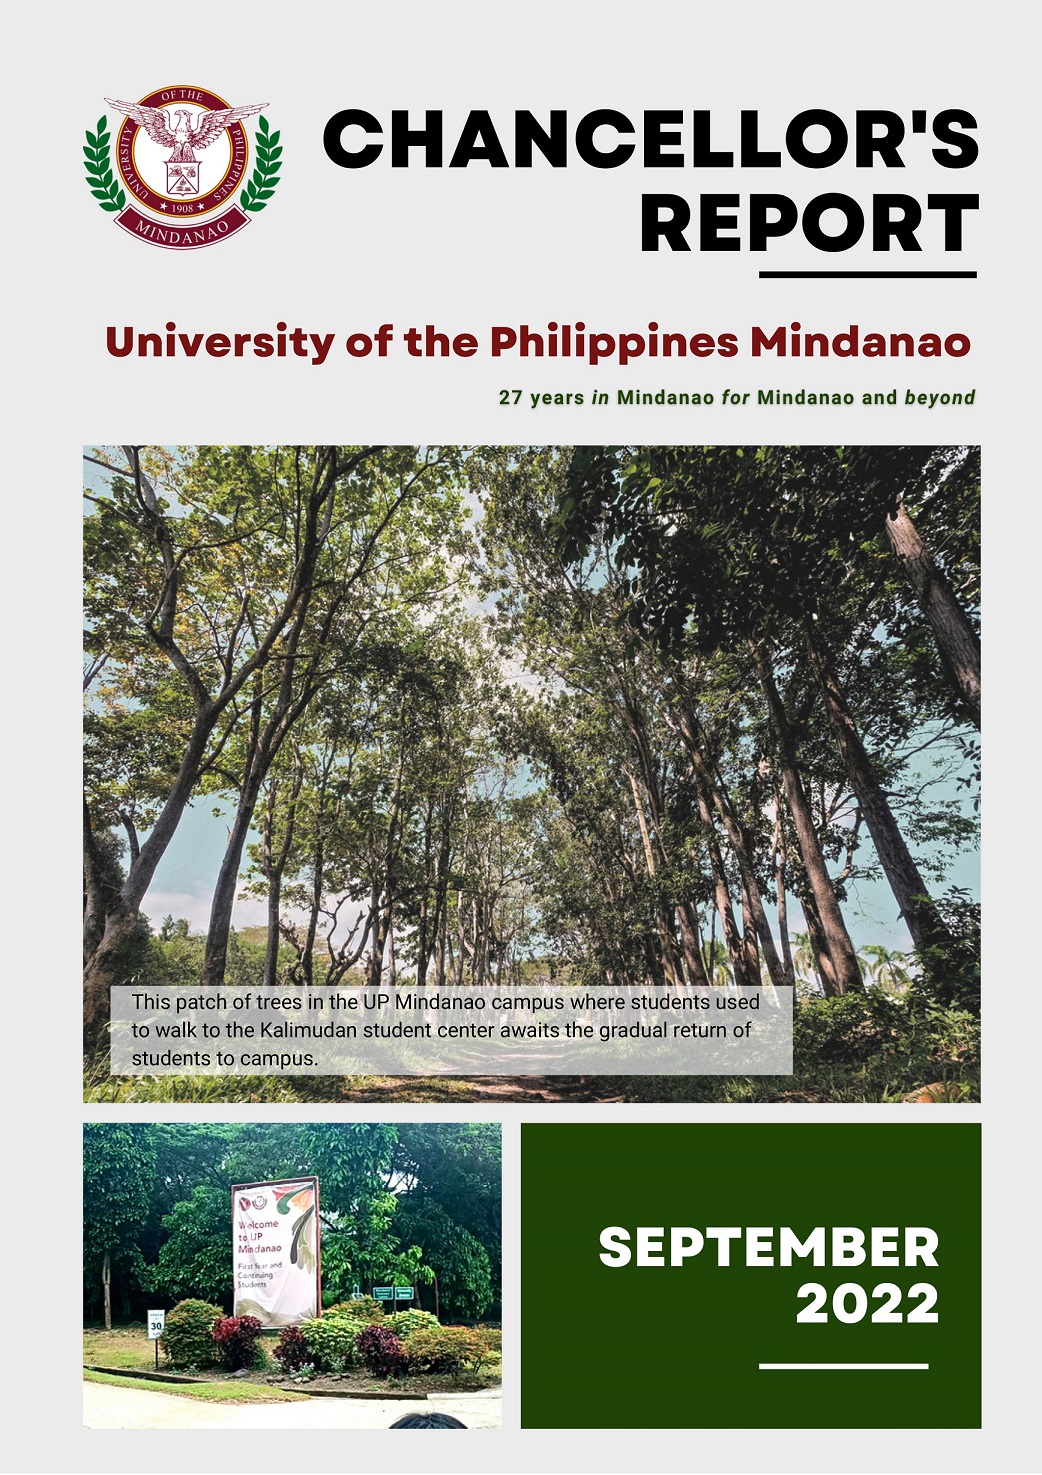 UPMin PAC report  covering September 2022 revised